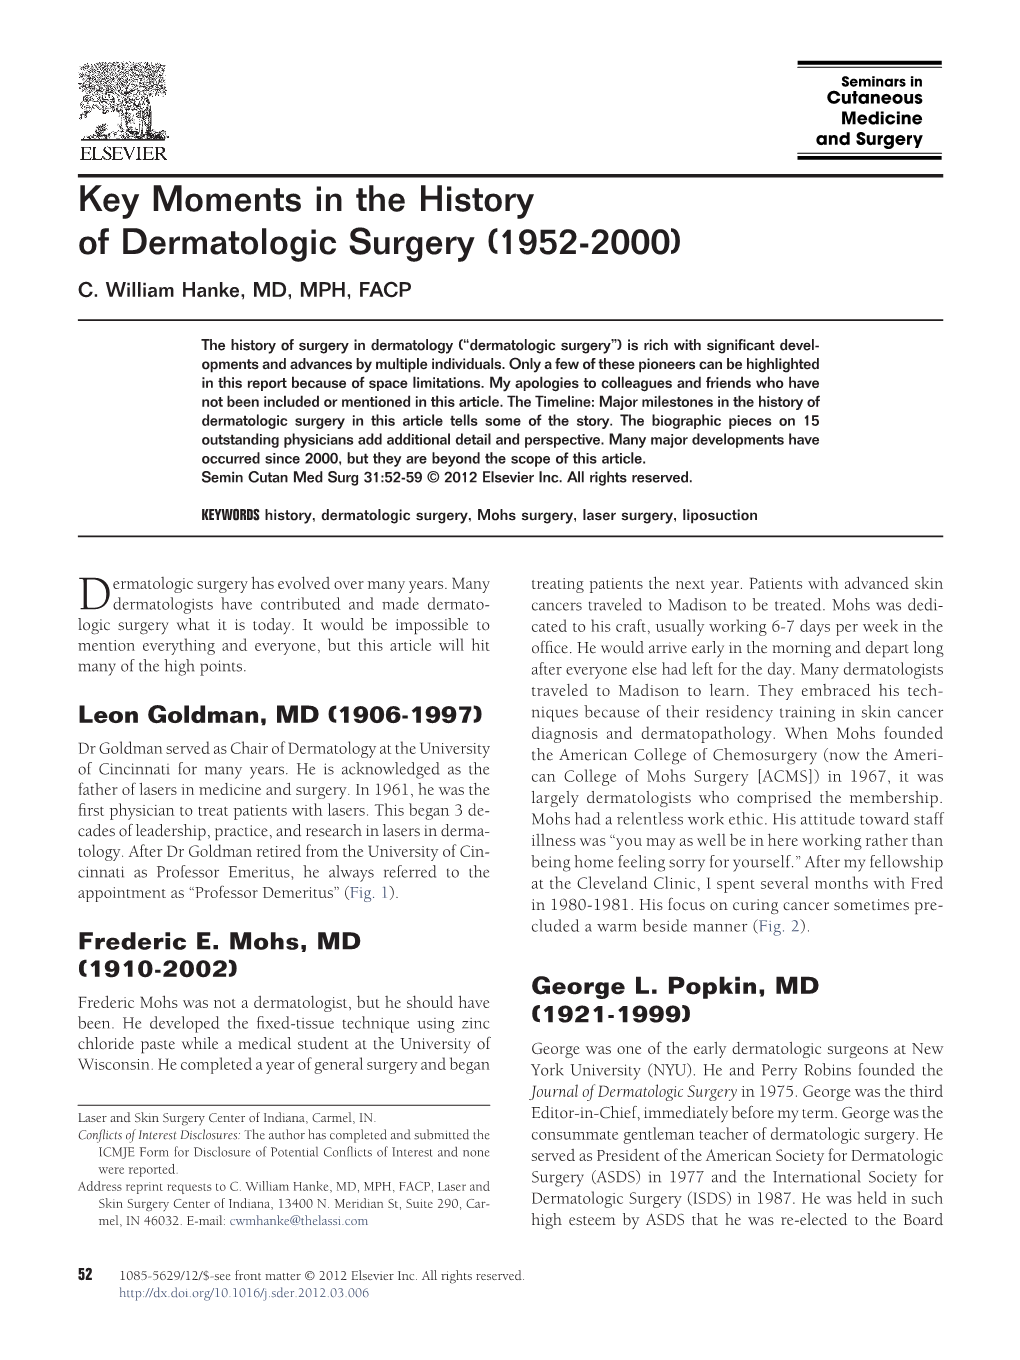 Key Moments in the History of Dermatologic Surgery (1952-2000) C